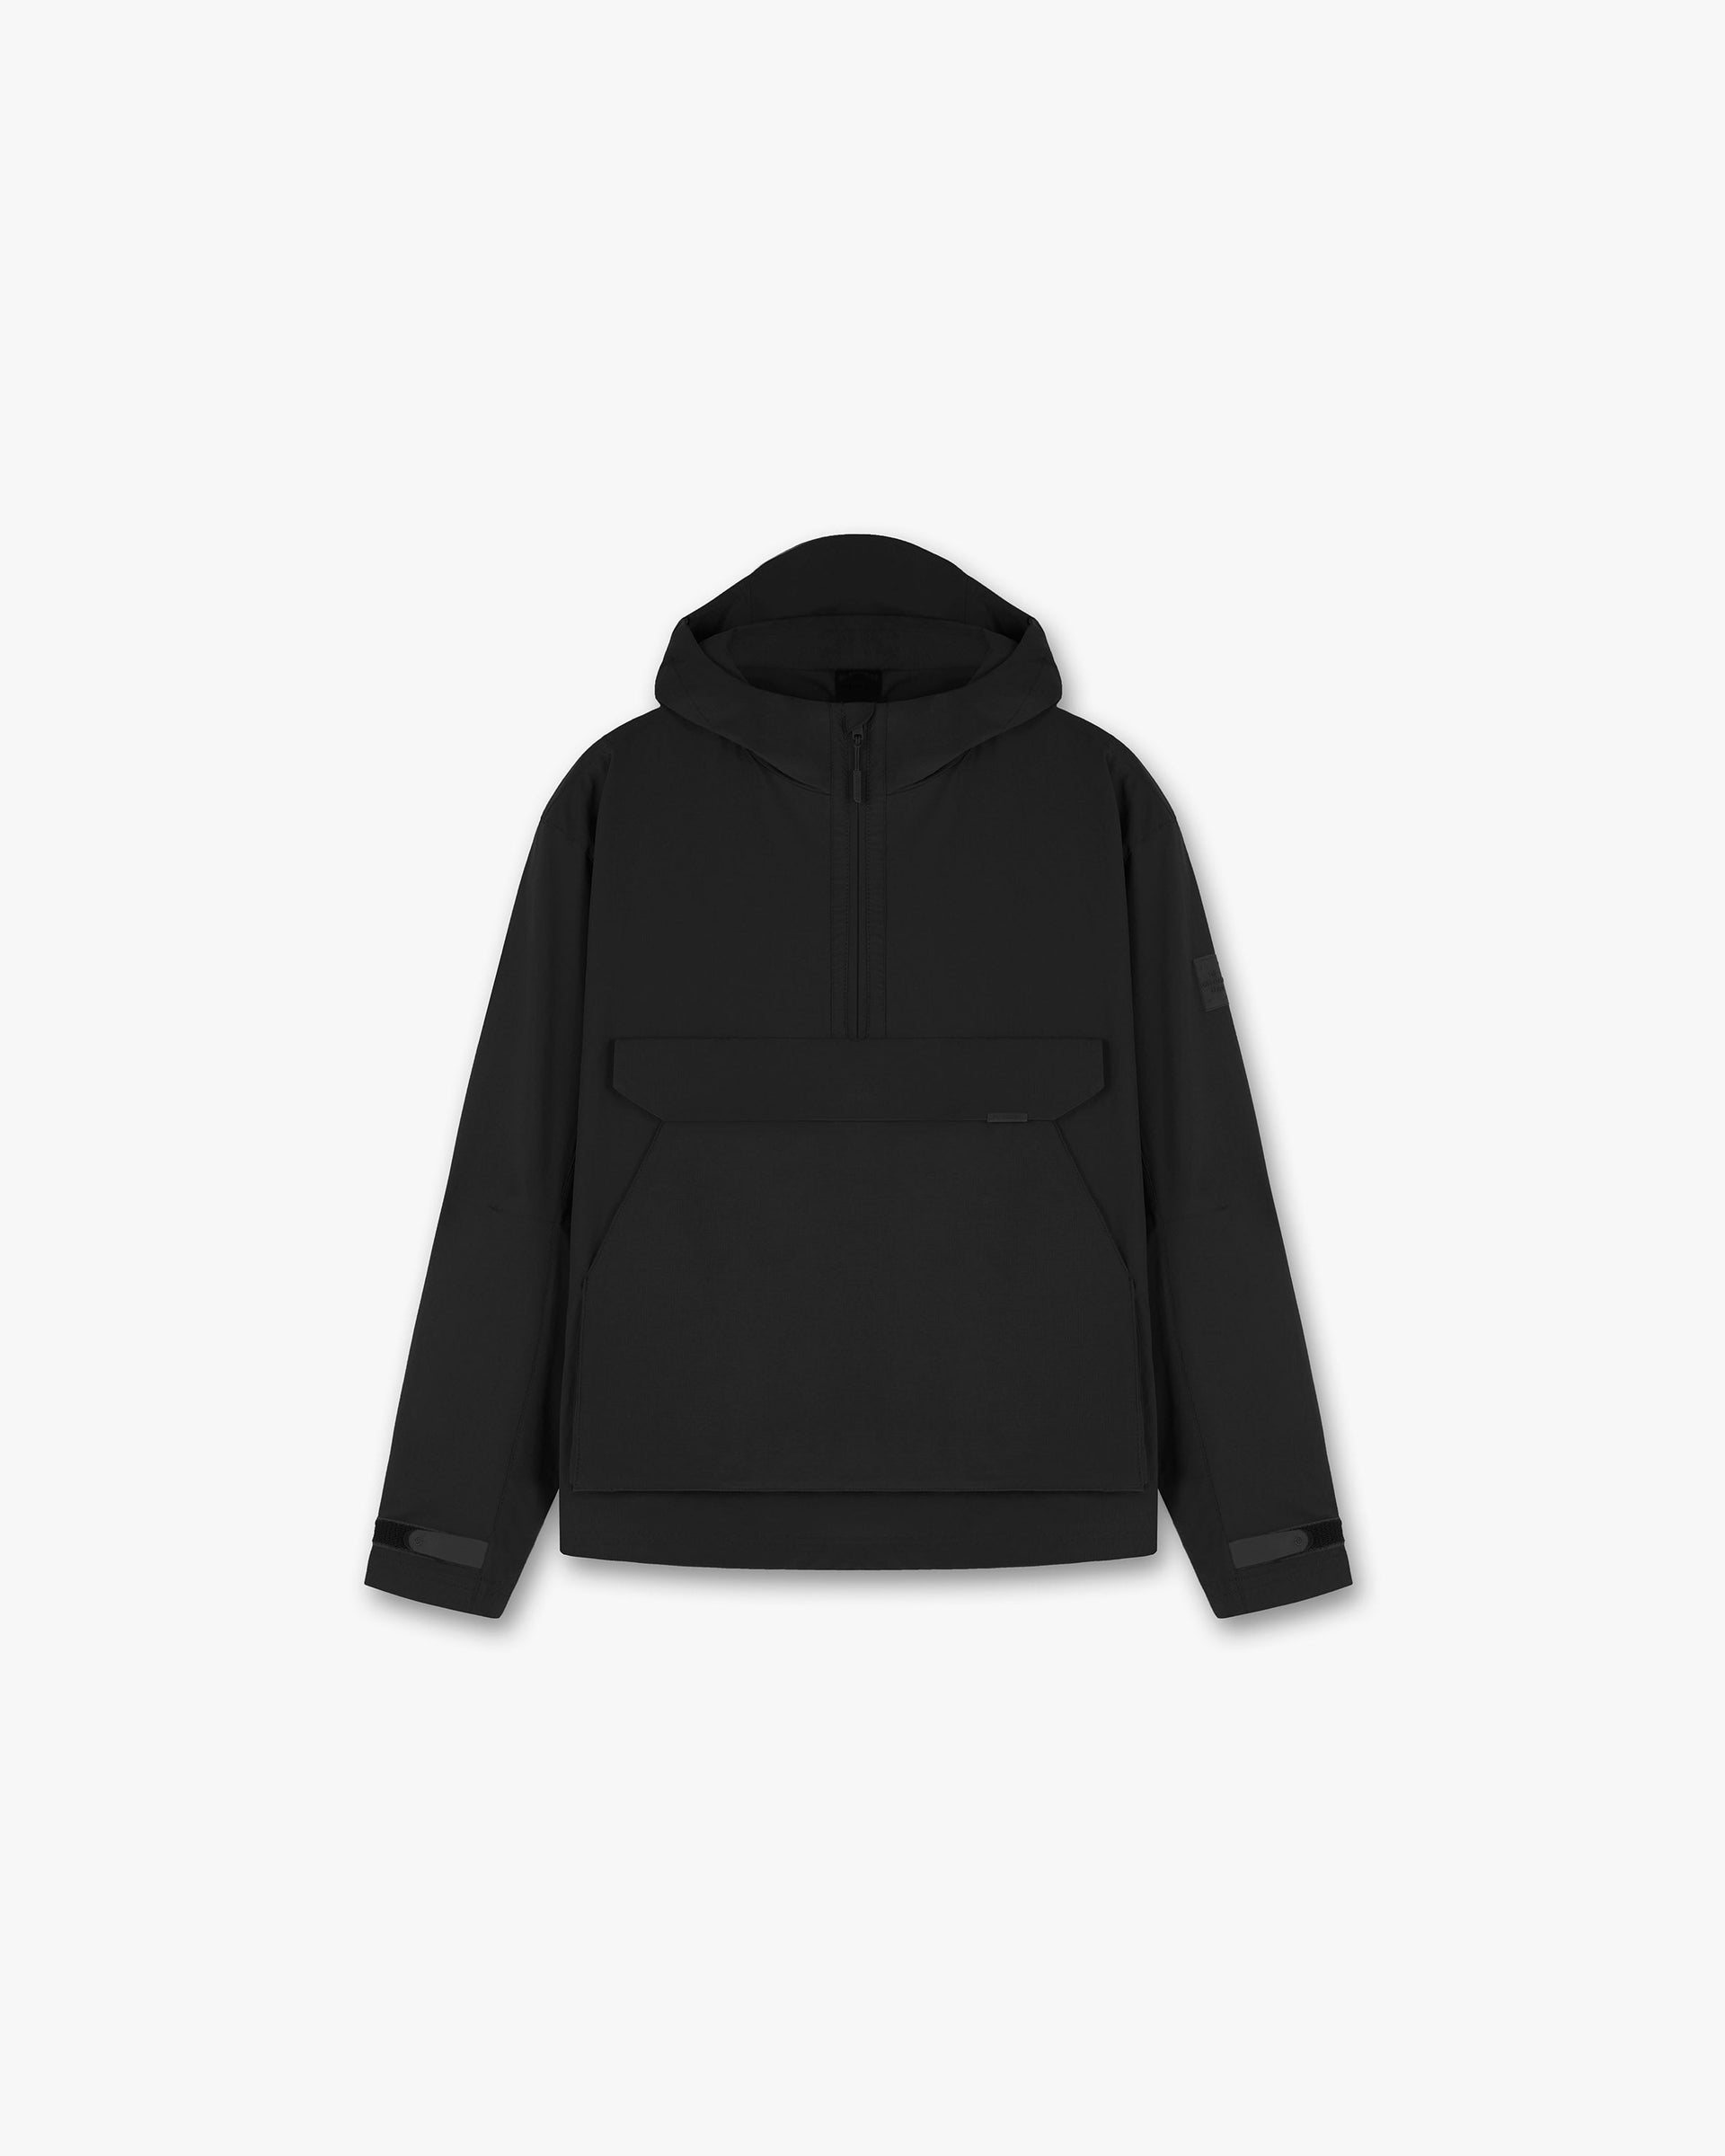 247 Outerwear | Gym Jackets | REPRESENT CLO